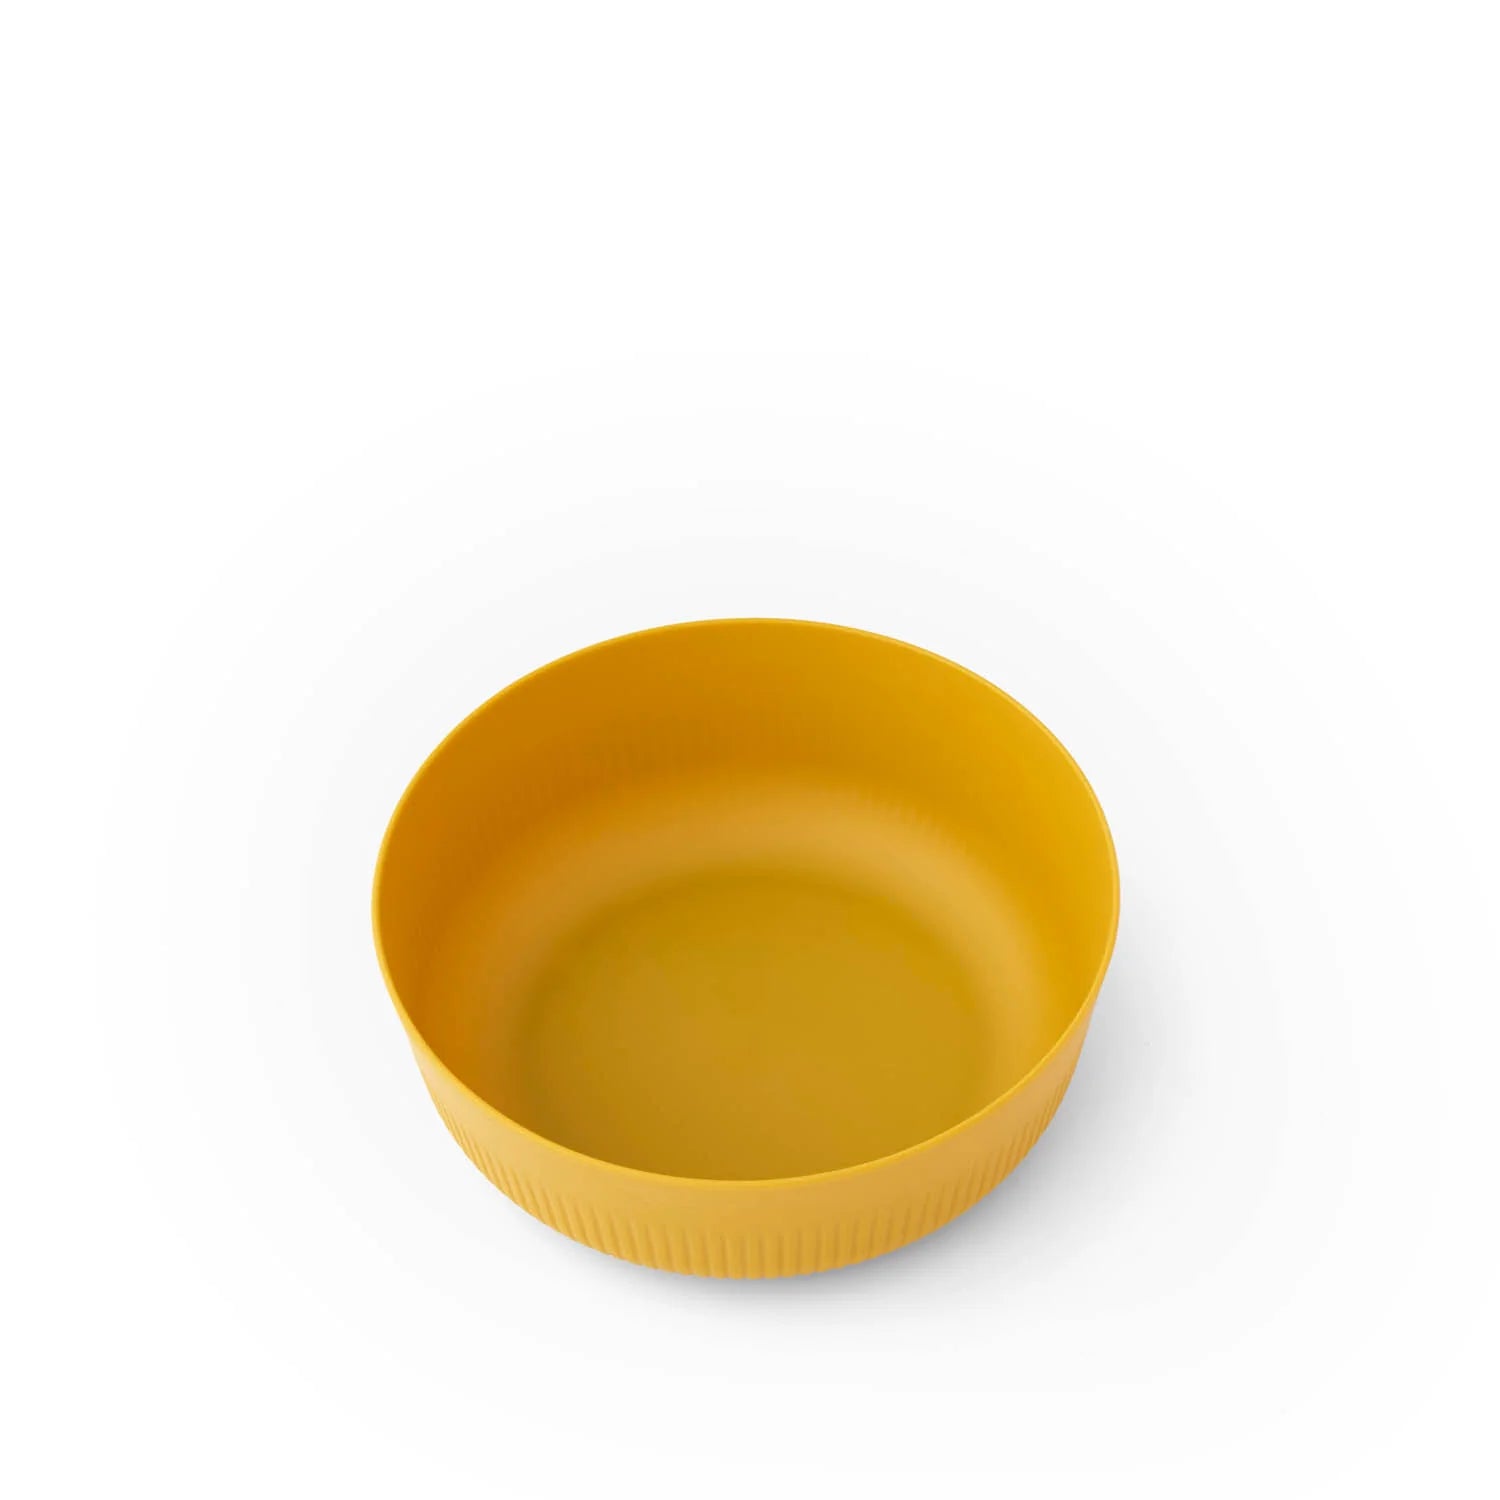 Sea to Summit Passage Bowl - Large - YELLOW - Mansfield Hunting & Fishing - Products to prepare for Corona Virus